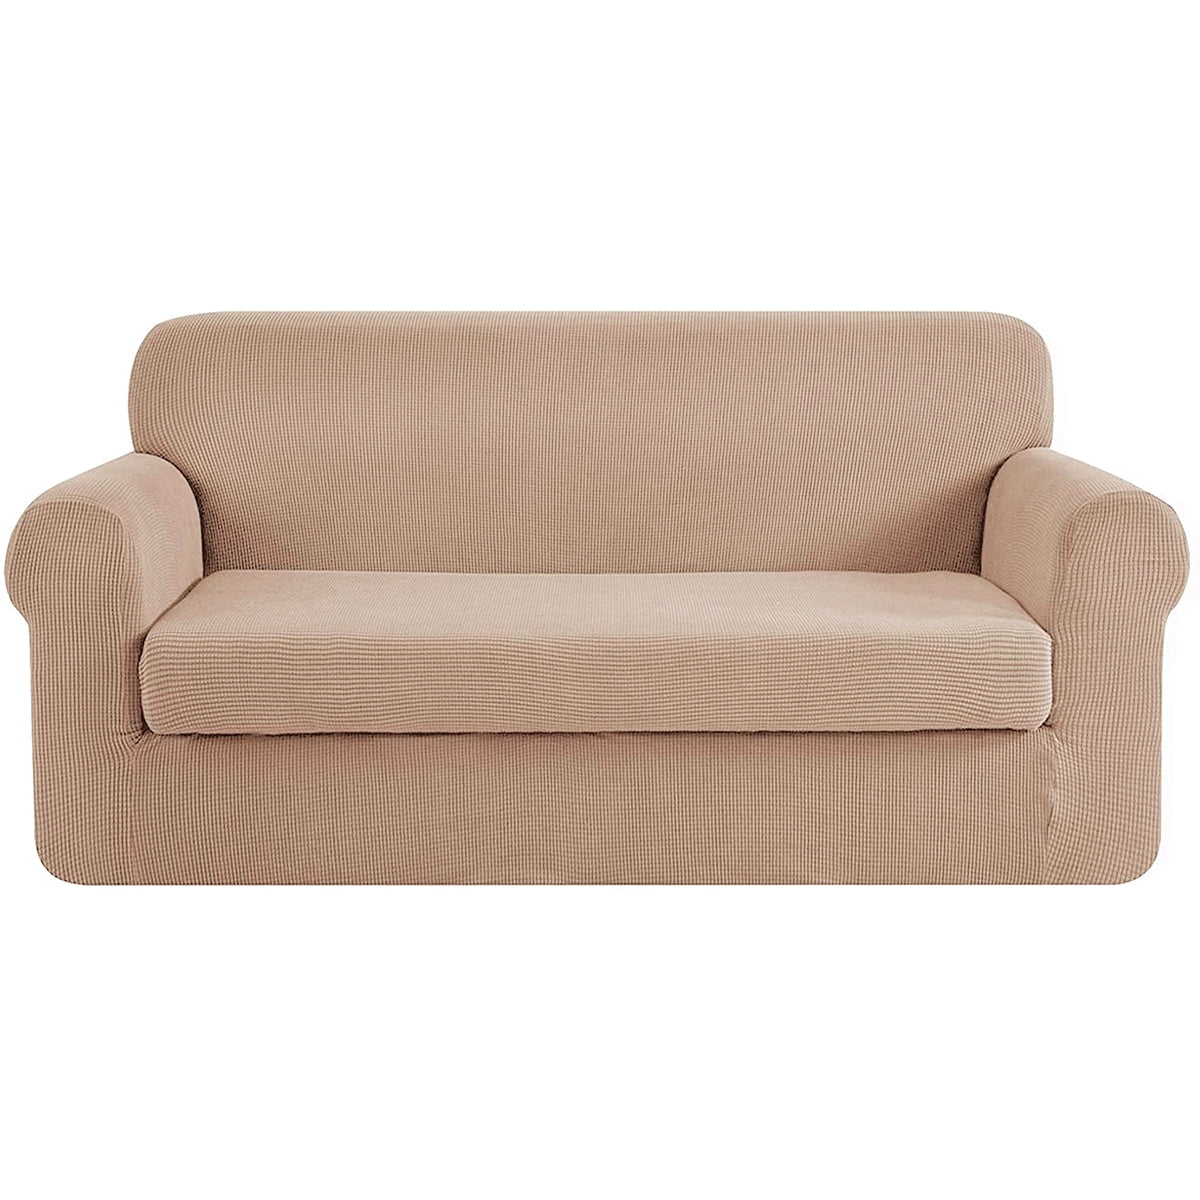 Details about   Chenille Jacquard Sofa Slipcover Couch Sofa Cover Washable Protector Sofa Towel